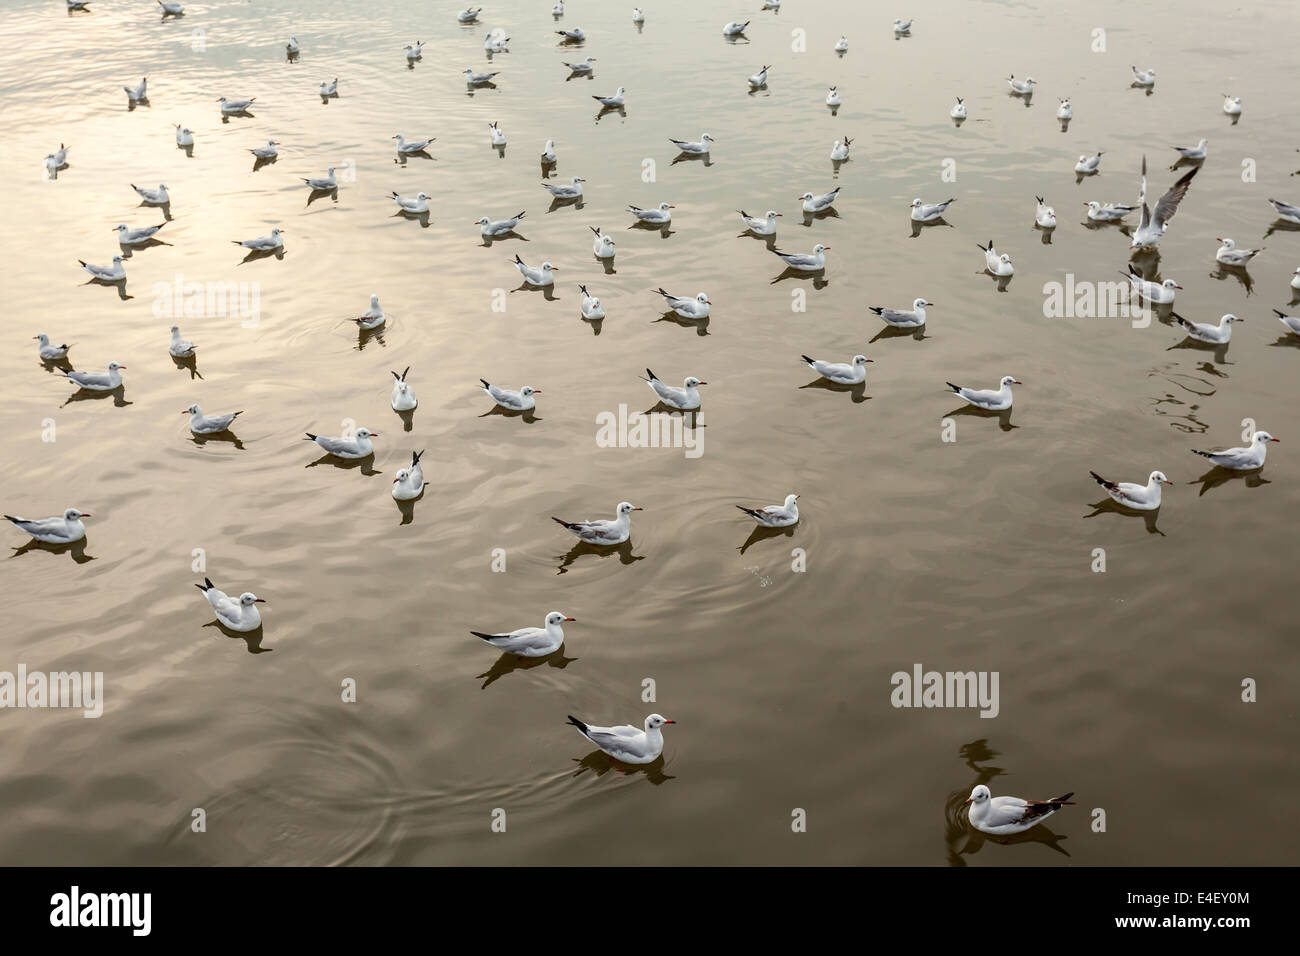 In the water of the sea sit alot seagulls Stock Photo